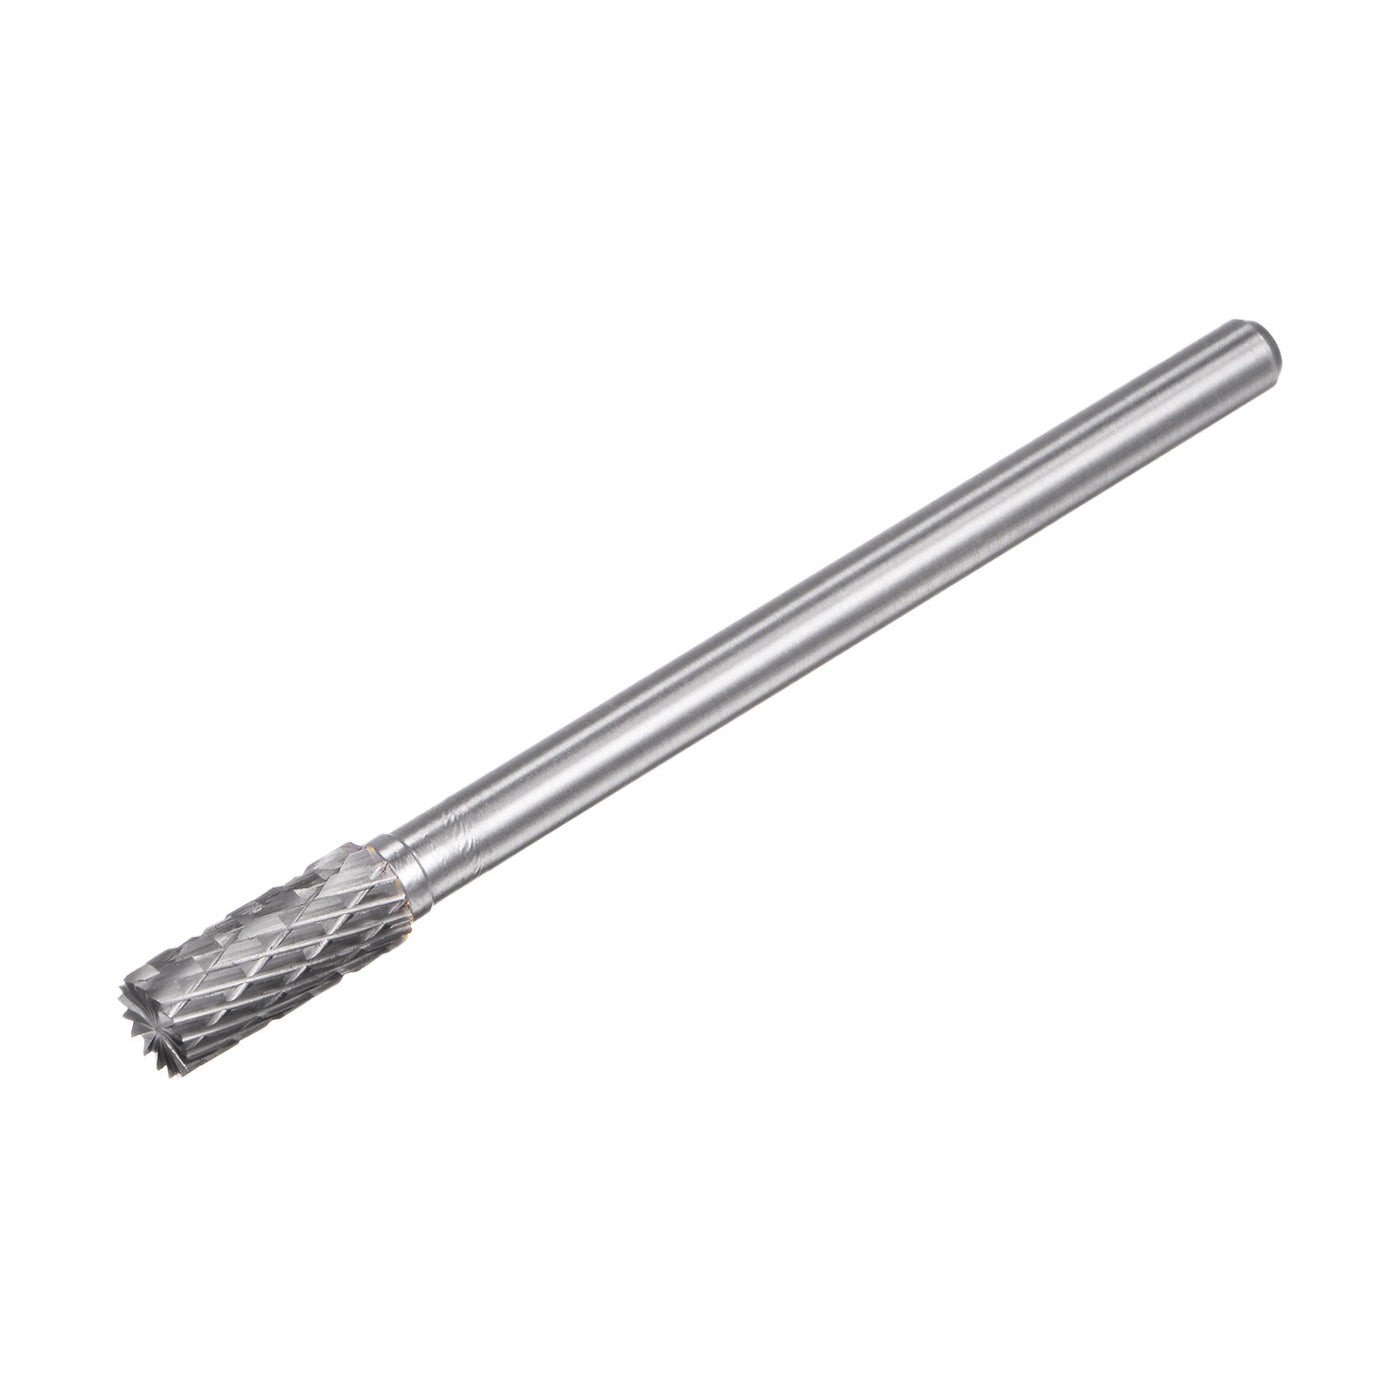 Uxcell Uxcell 8mm x 150mm 6mm Shank Double Cut Cylinder Carbide Tip Rotary Files